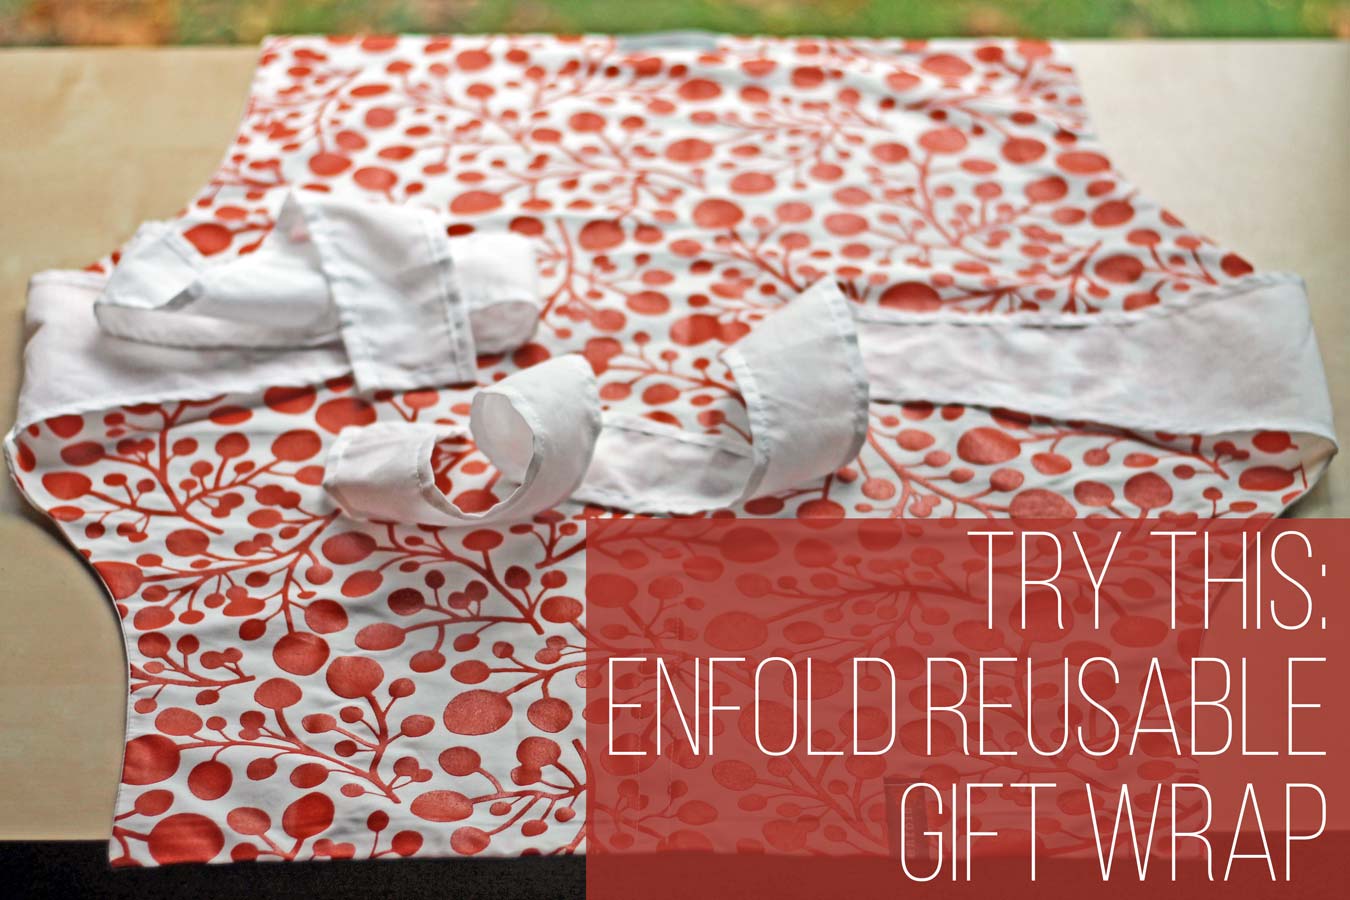 Wading In Big Shoes - Try This: Enfold Reusable Gift Wrap